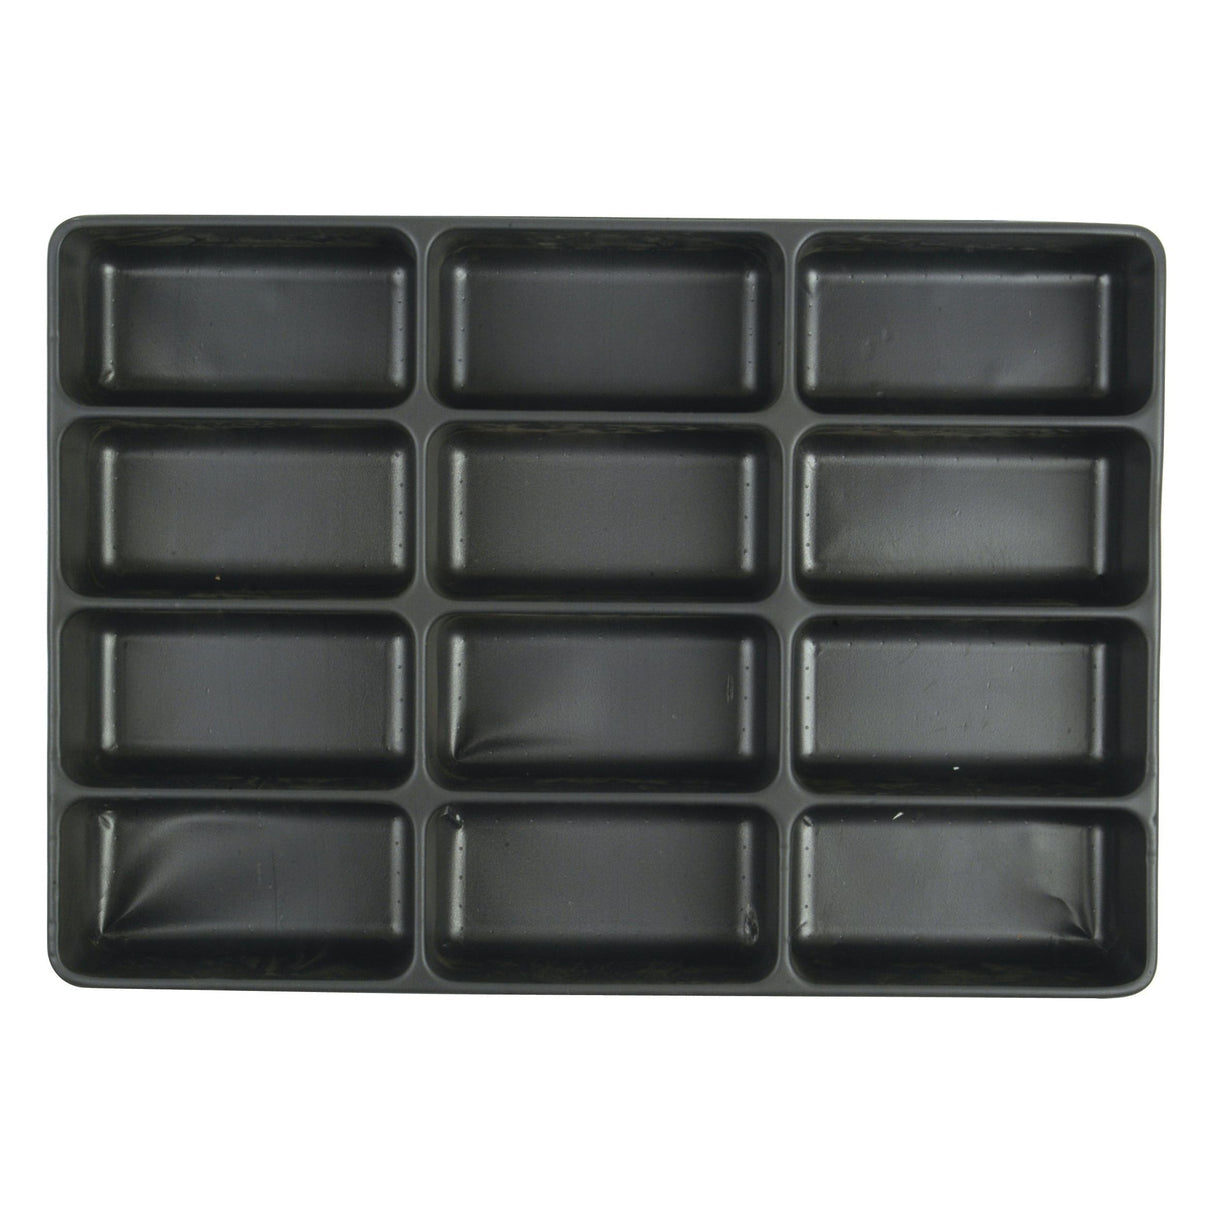 12 Compartment Tray (330 x 50 x 230mm)
 - S.2425 - Farming Parts